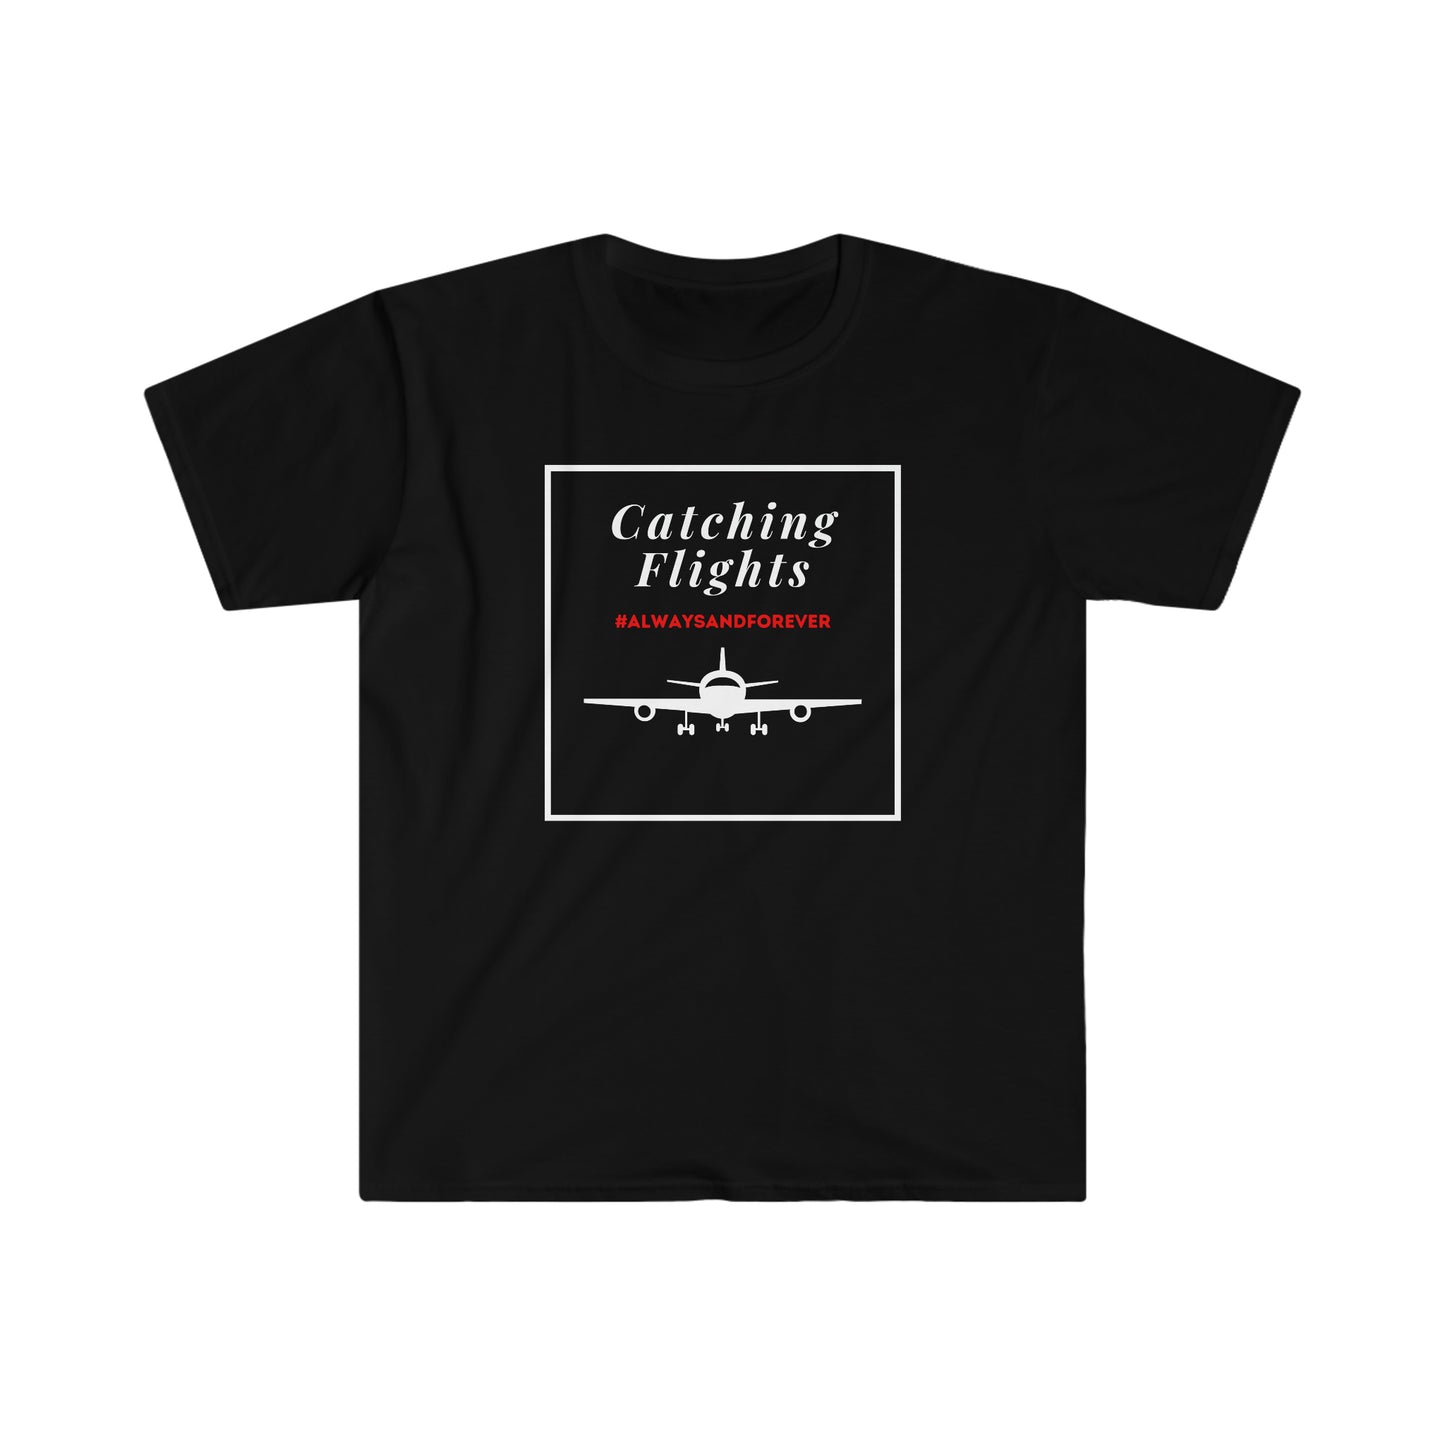 Catching Flights and Feelings - Couples T-shirt Set - Men